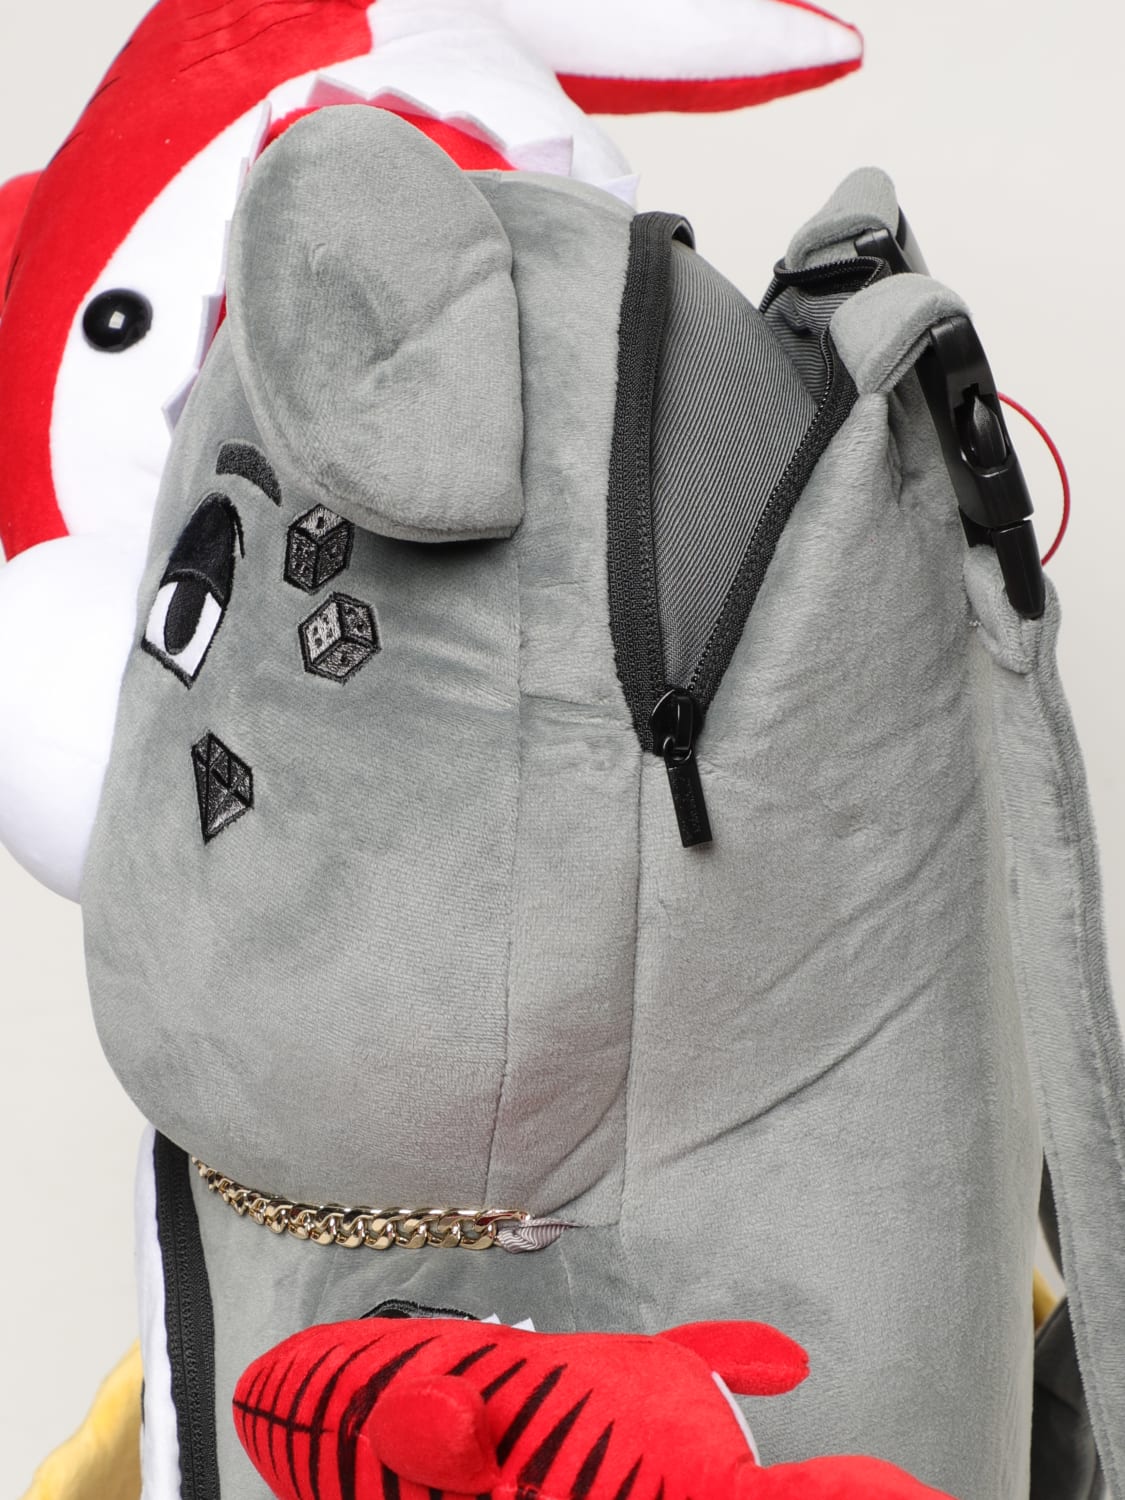 Sprayground Couture Bear White & Grey Backpack